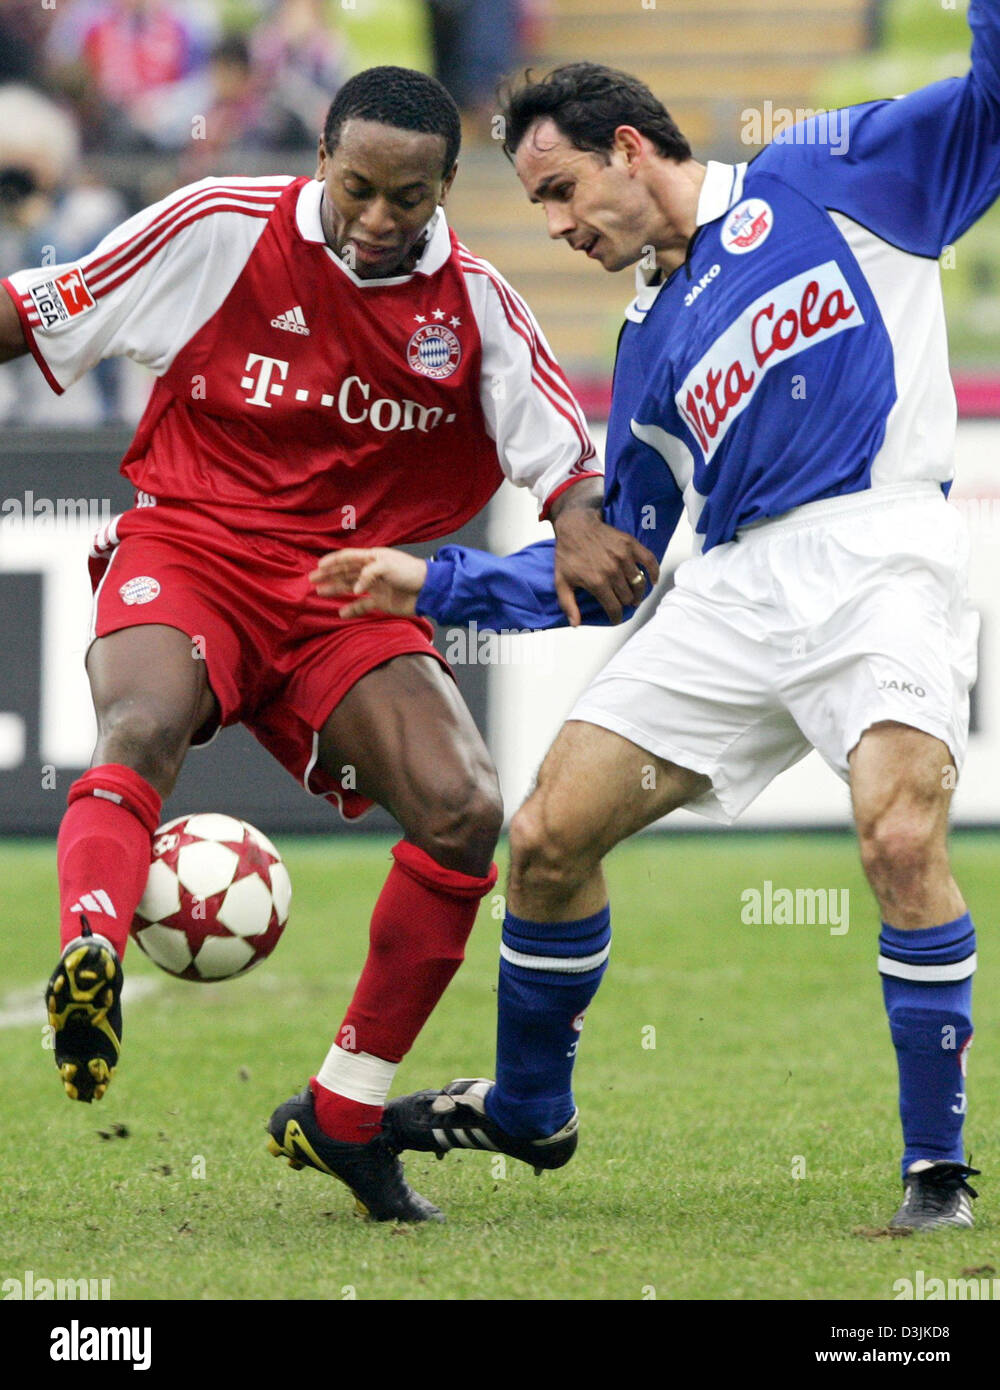 (dpa) - Bayern Munich's Ze Roberto (L) fights for the ball with Rostock's Michael Hartmann during the game between FC Bayern Munich and FC Hansa Rostock in Munich, Germany, 19 March 2005. Stock Photo